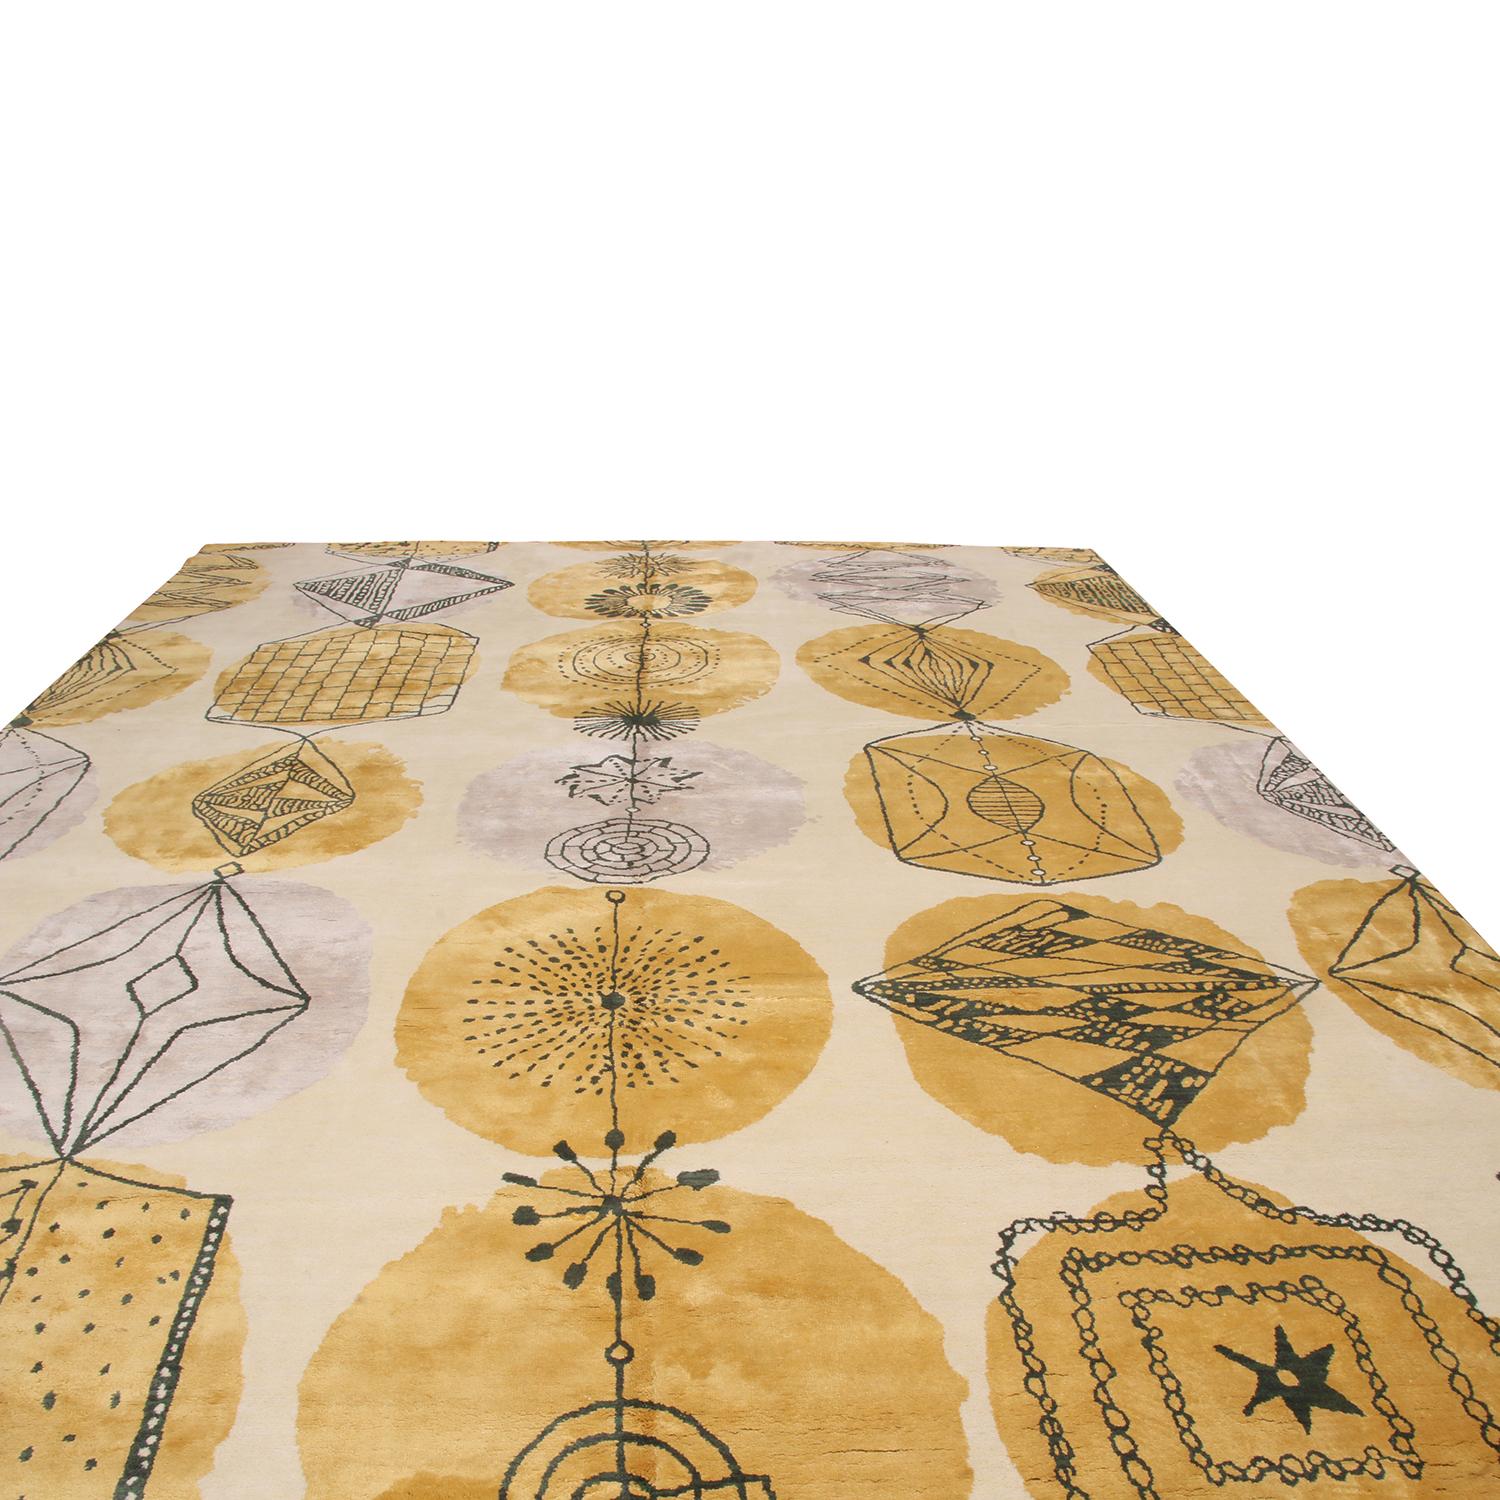 Hand knotted in lush, high-quality wool with accenting lustrous silk, this geometric wool rug is part of the Mid-Century Modern collection from Rug & Kilim, a collection developed over four years refining this unique large-scale graph, texture, and